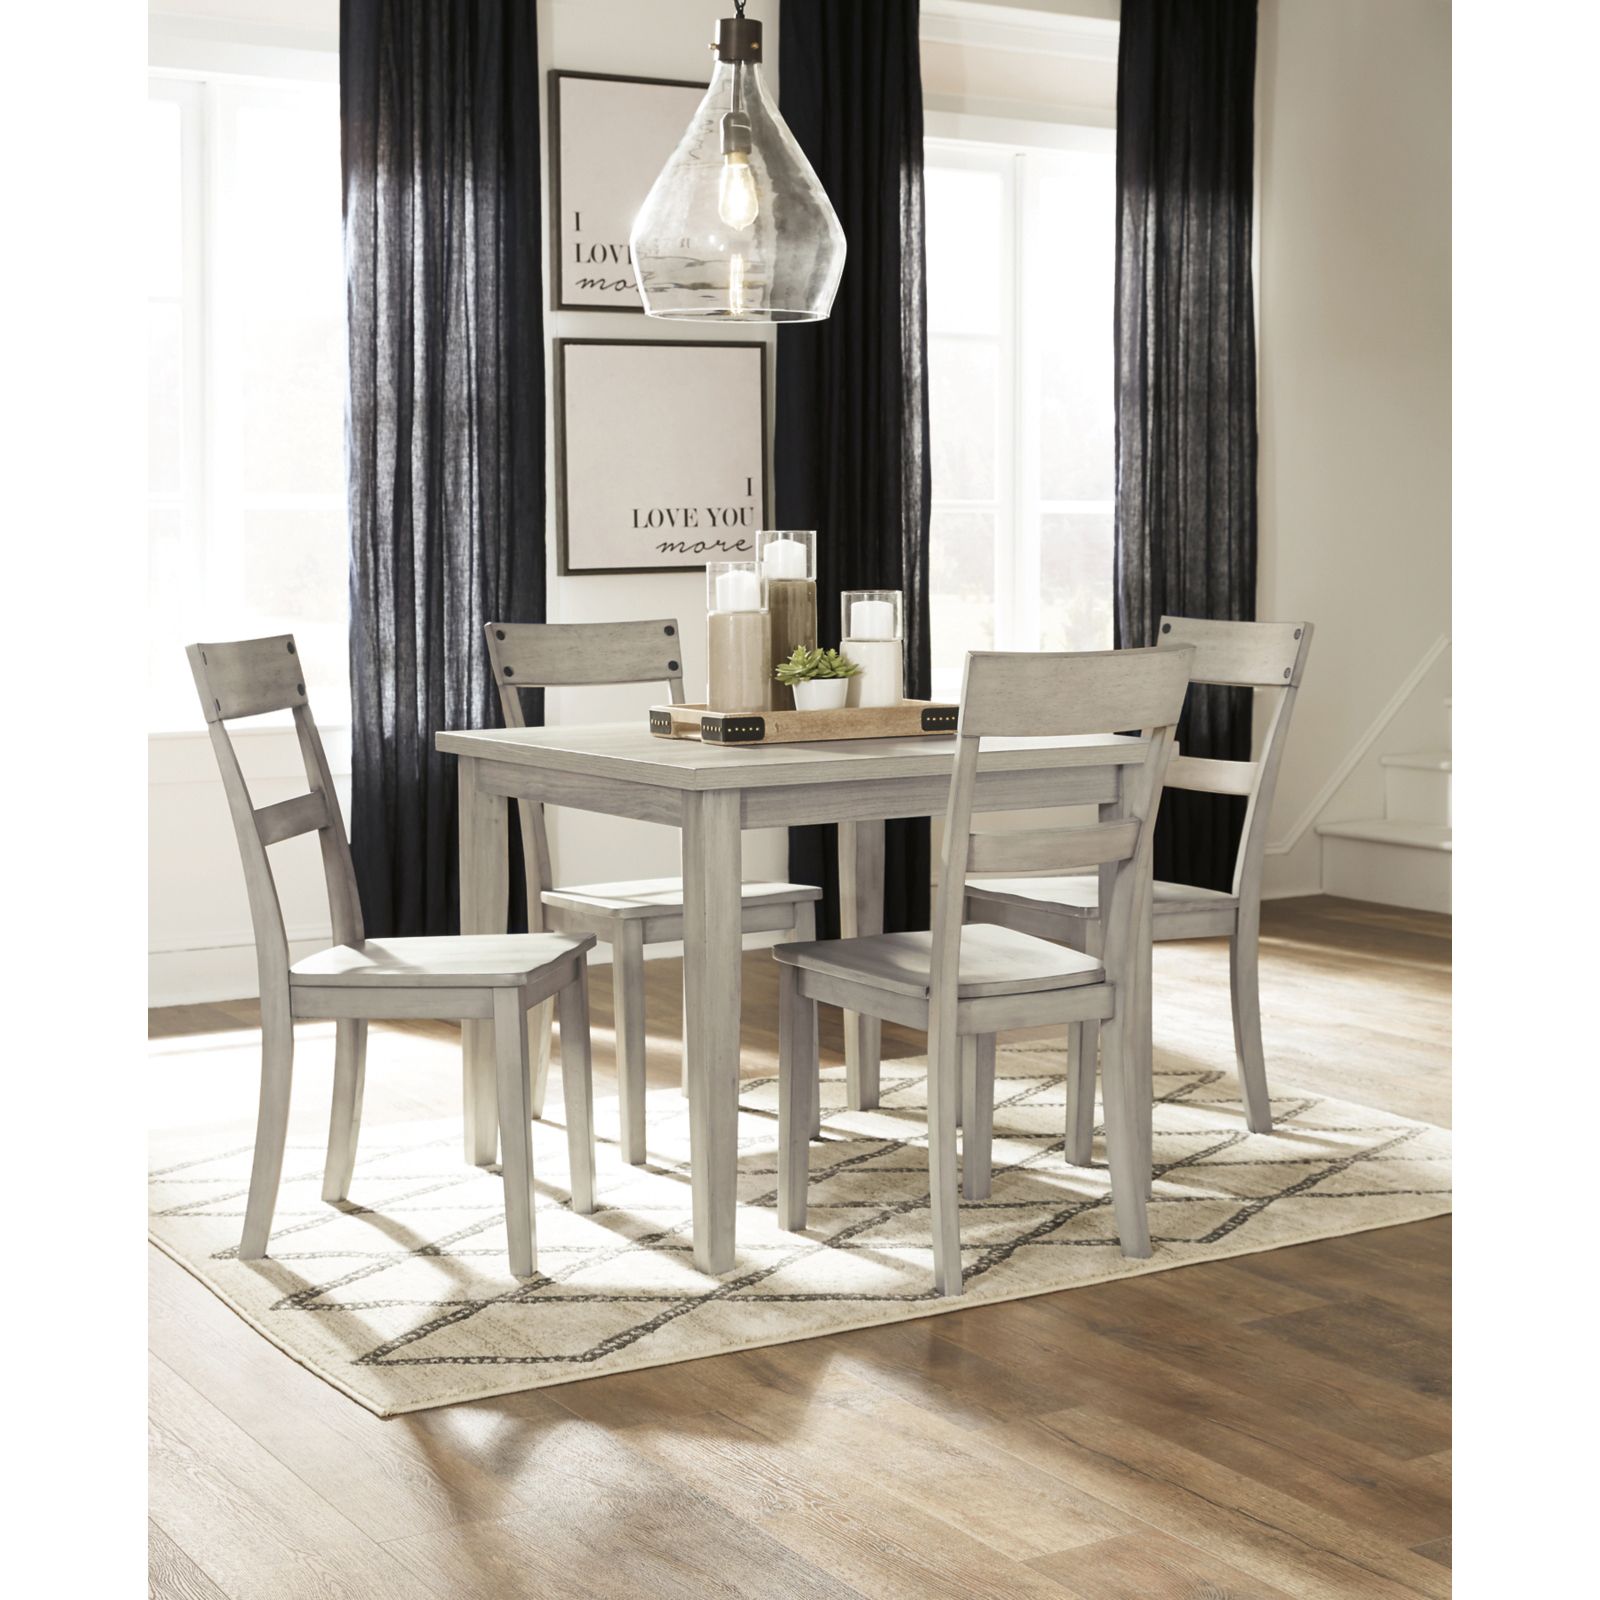  Dining Room Chairs Set Of 4